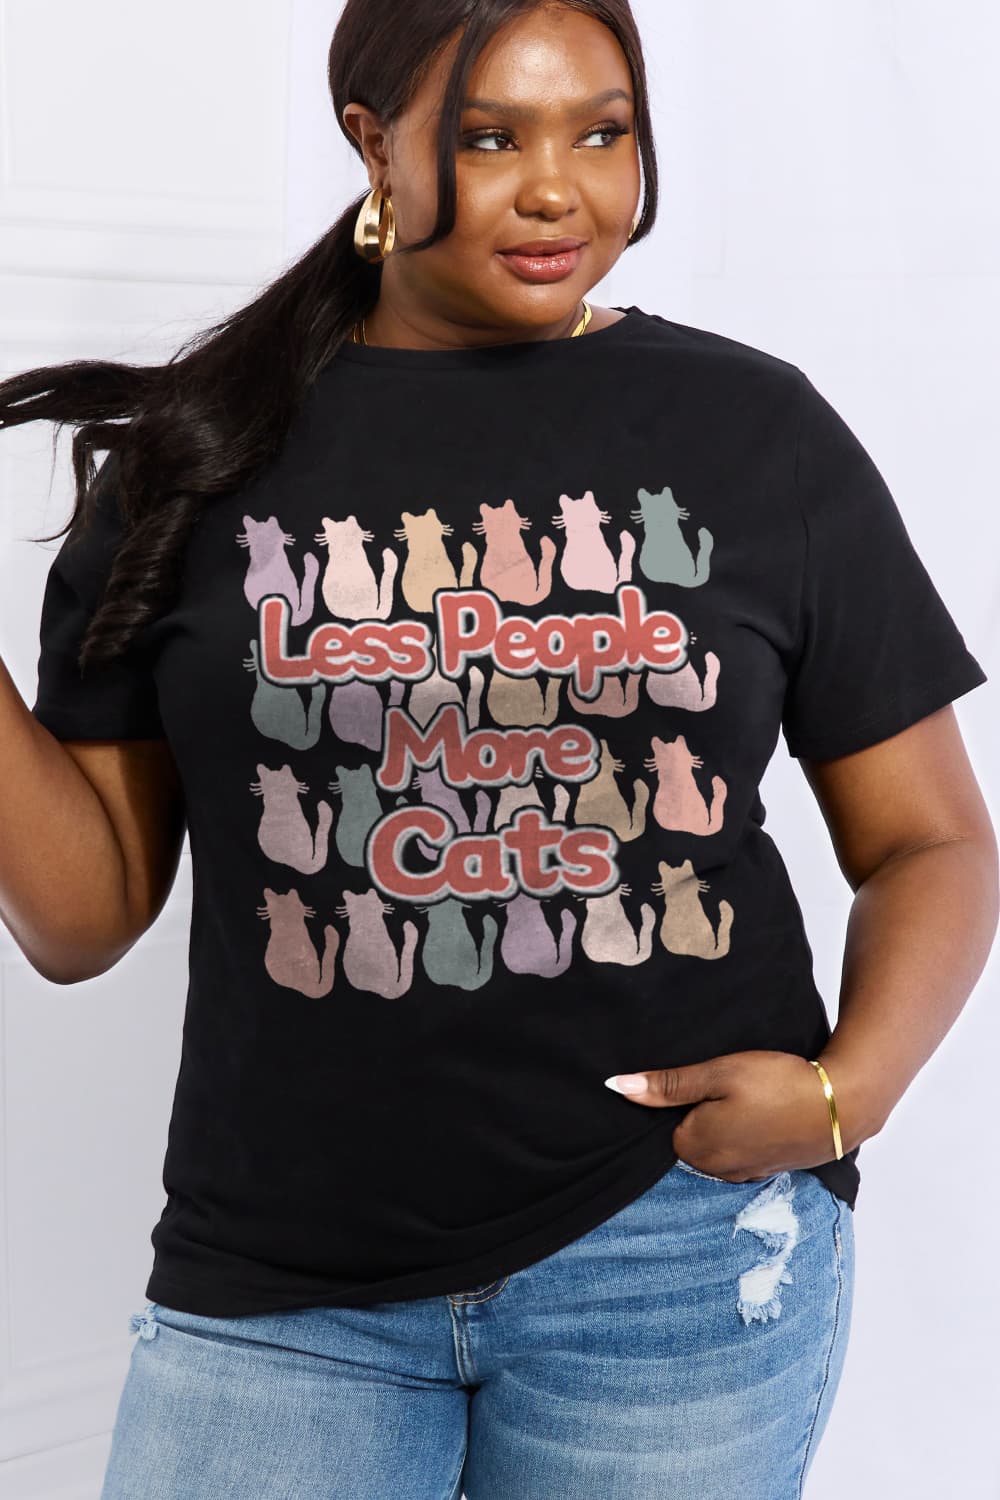 Simply Love LESS PEOPLE MORE CATS Graphic Cotton Tee